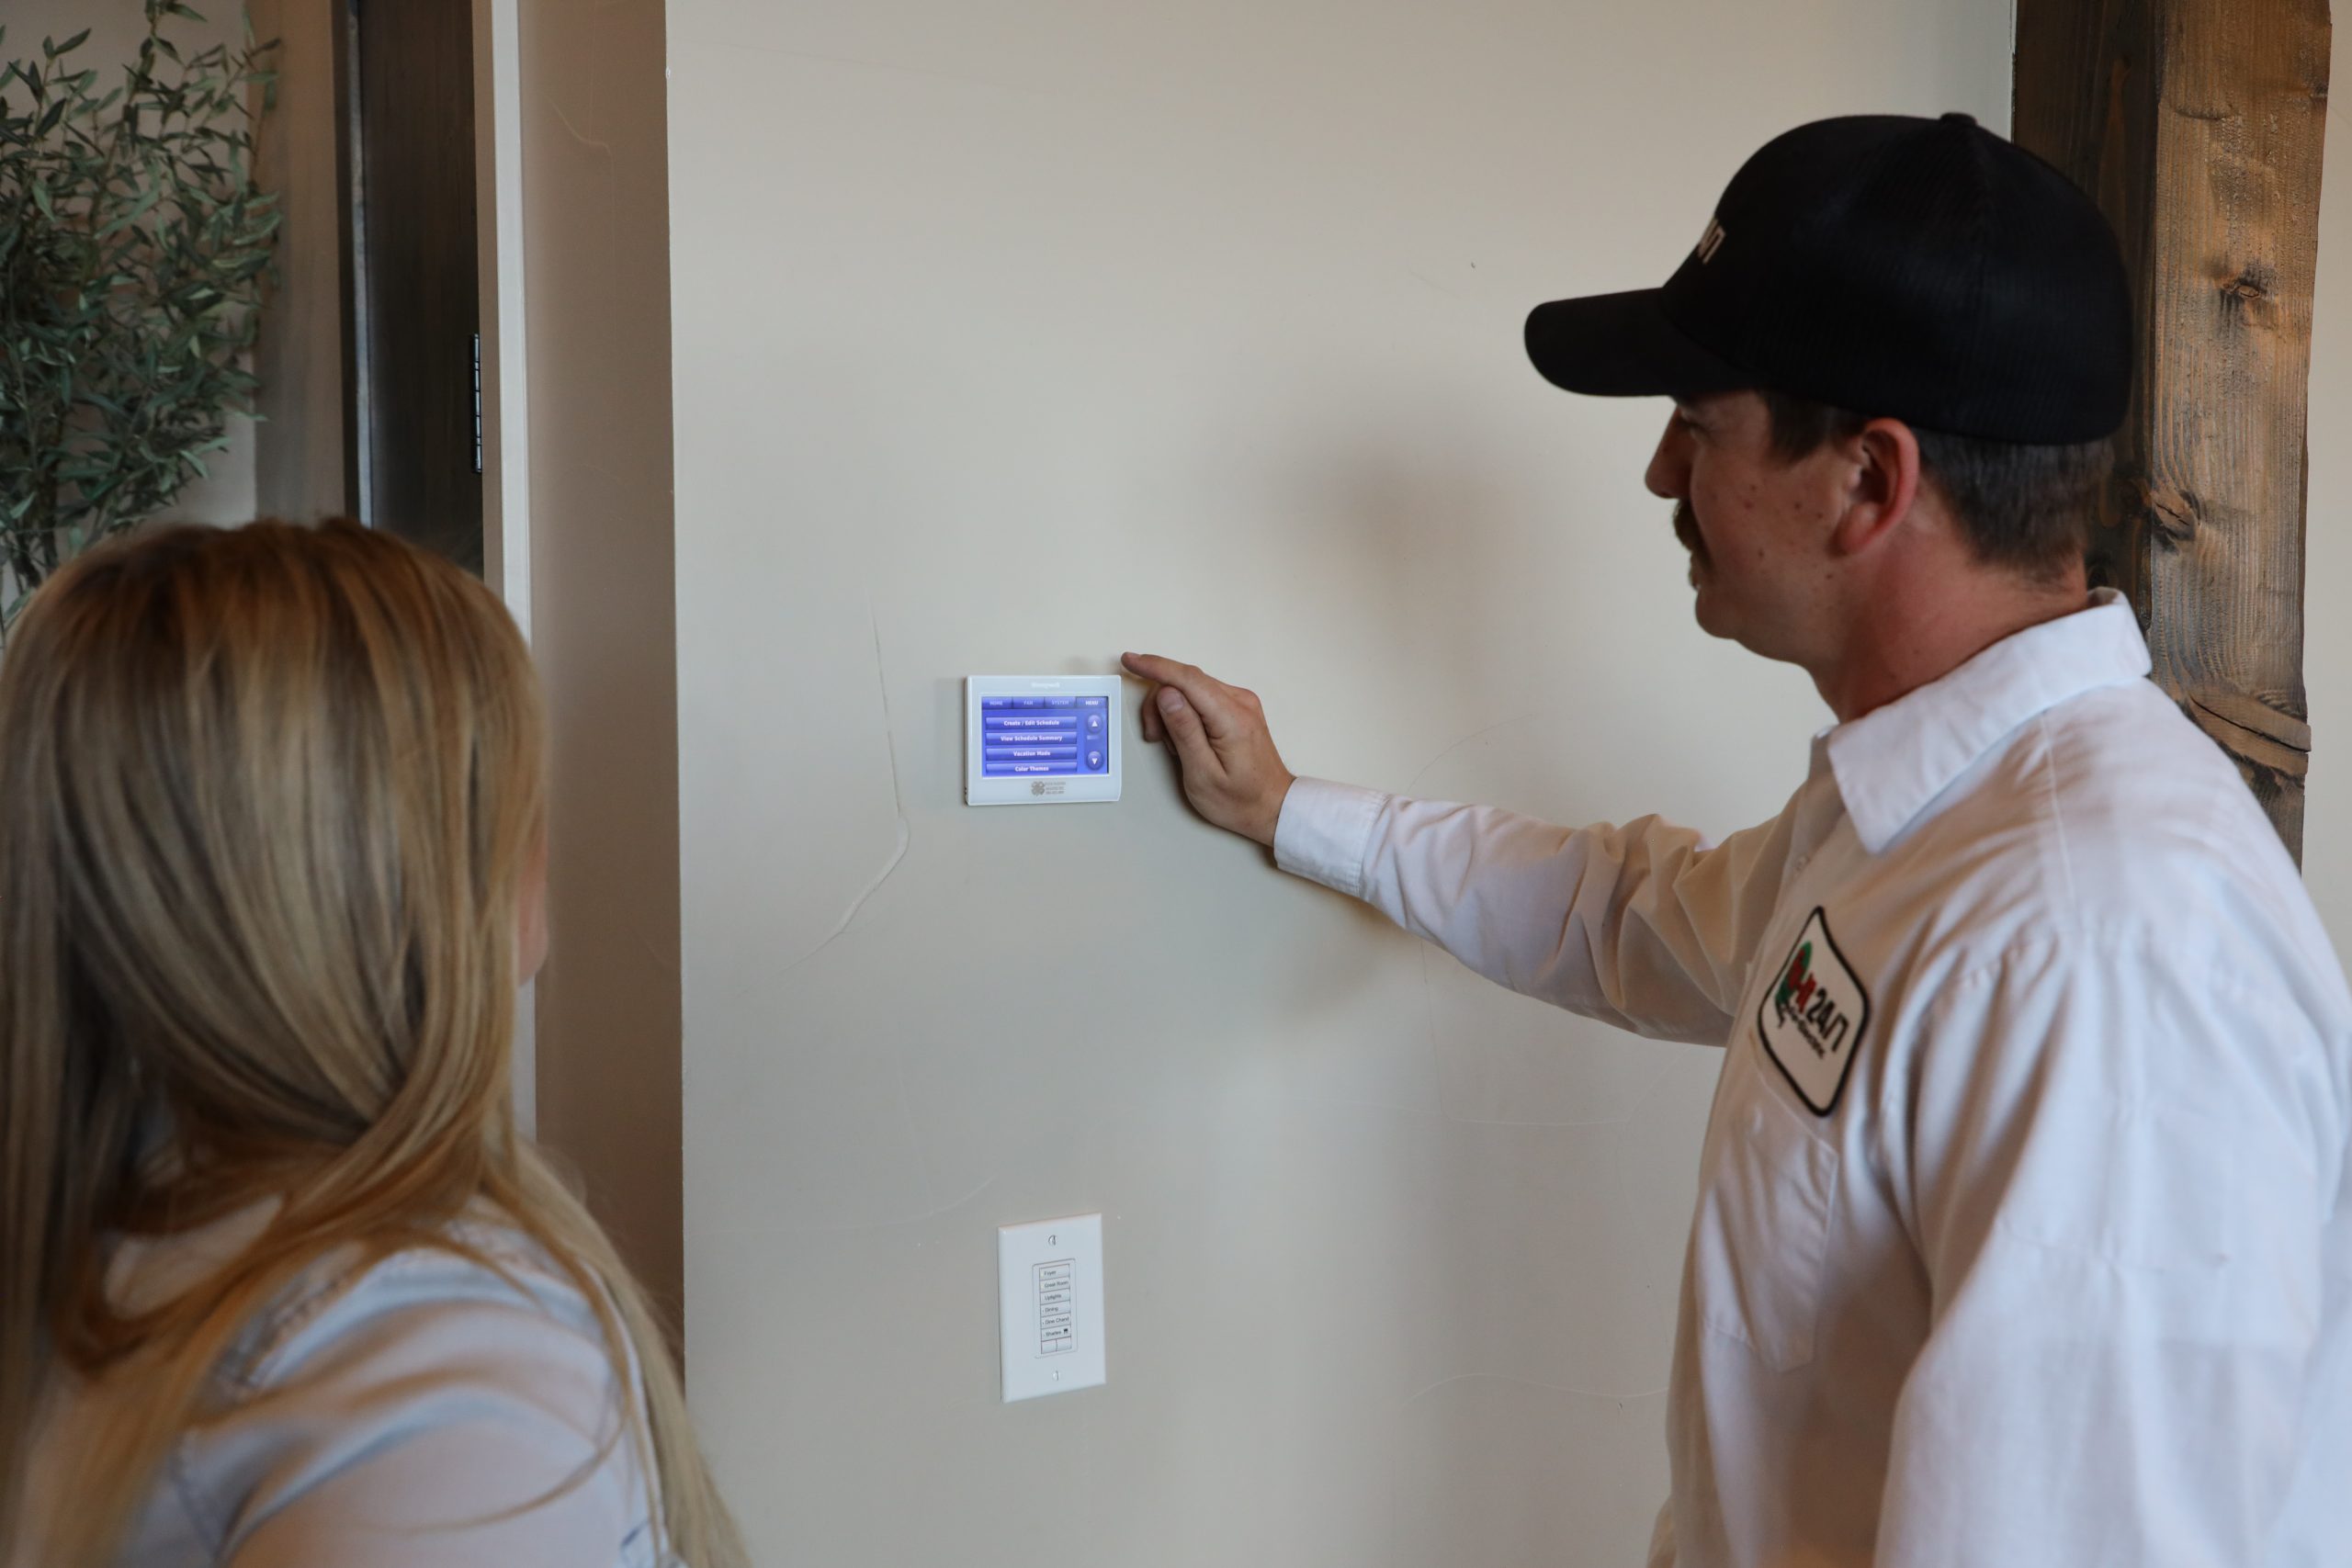 Thermostat Installation & Repair in Golden, CO from Fix-it 24/7 Plumbing, Heating, Air & Electric